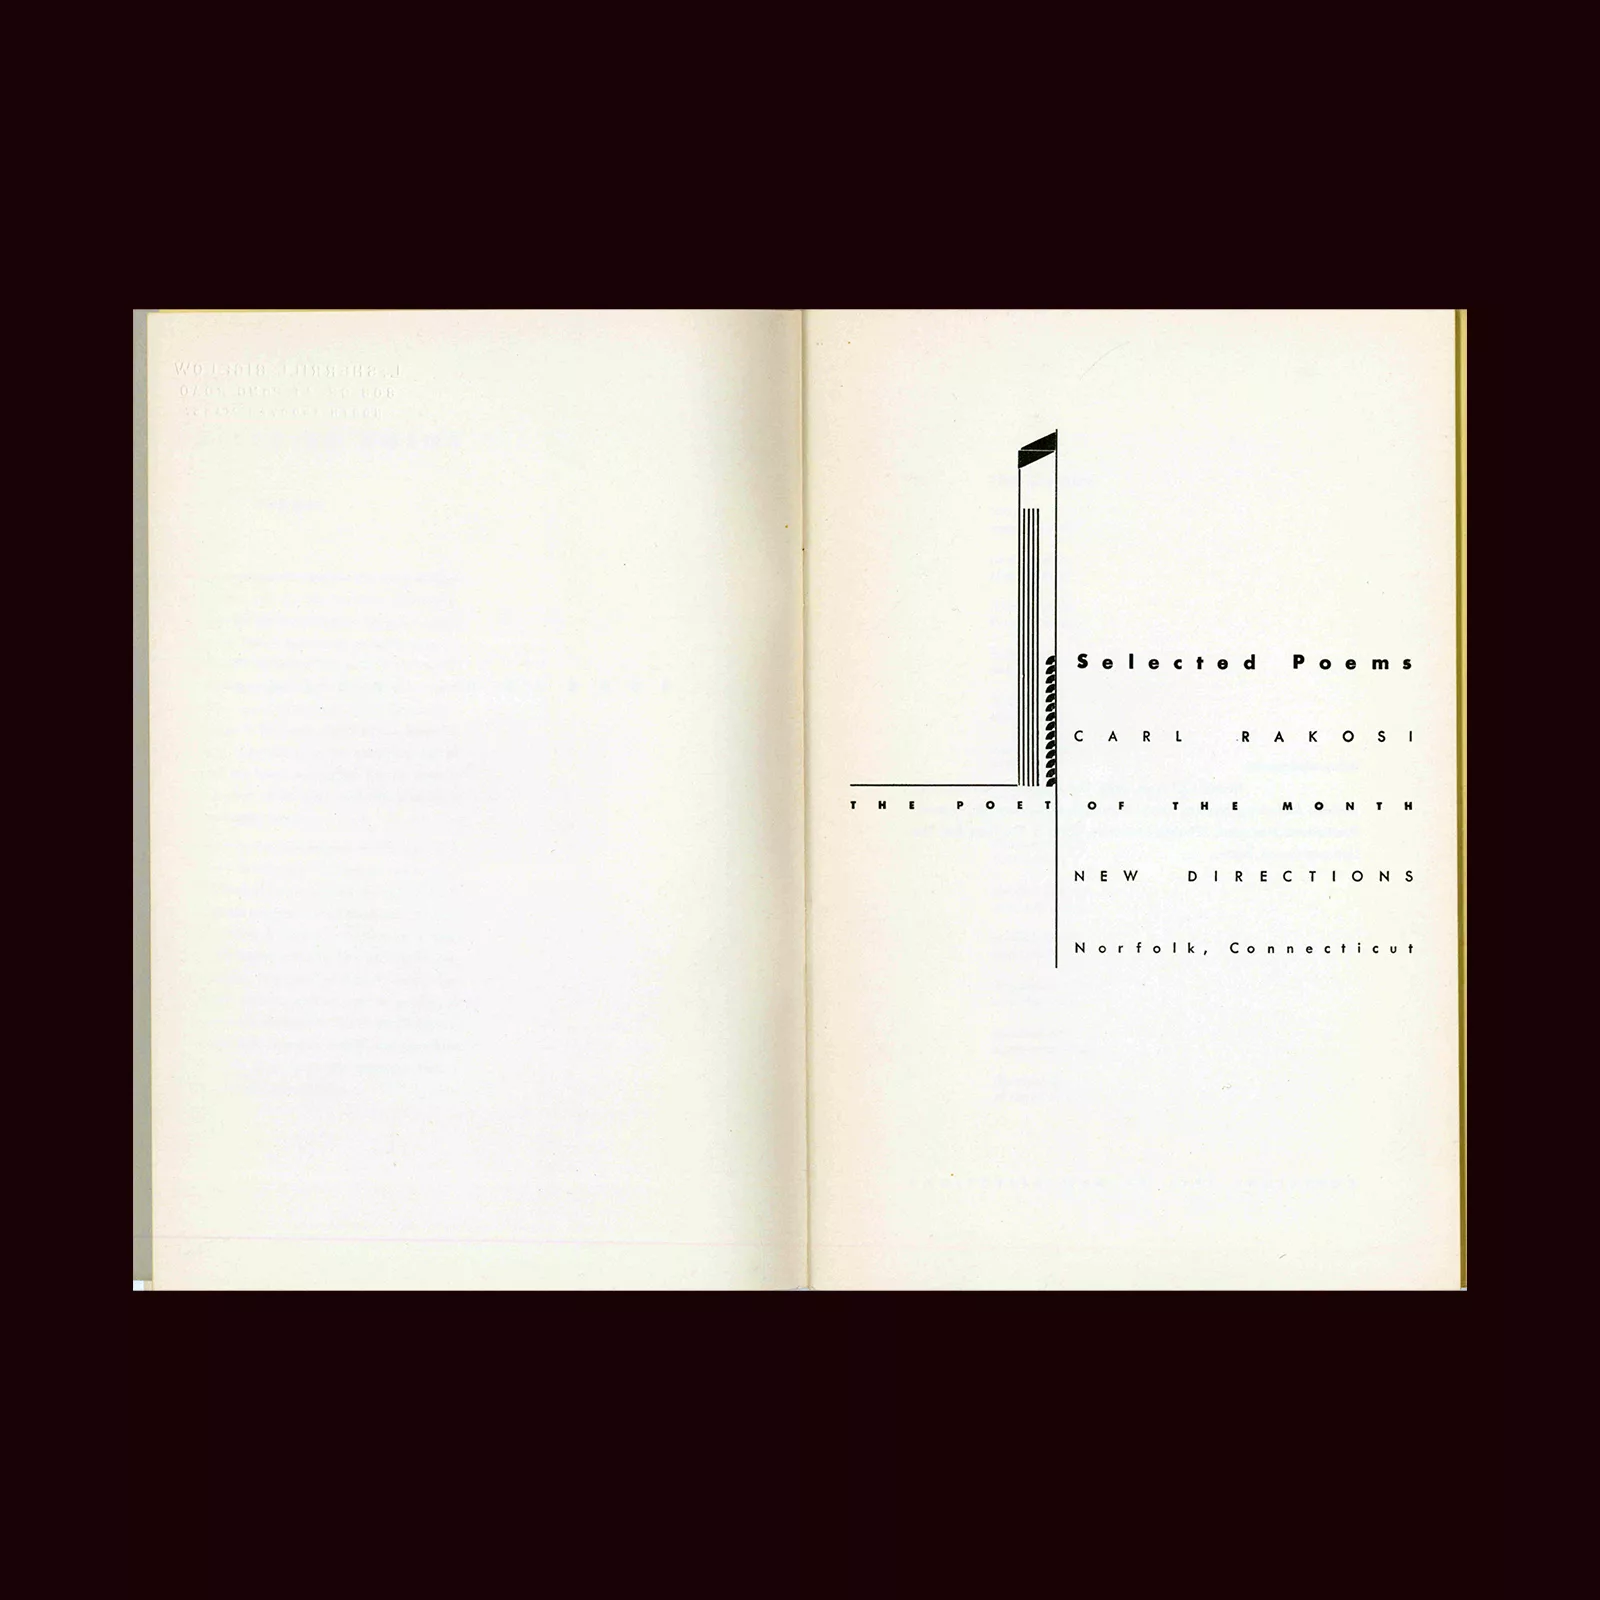 Selected Poems, Carl Rakosi, New Directions, 1941. Designed by Alvin Lustig